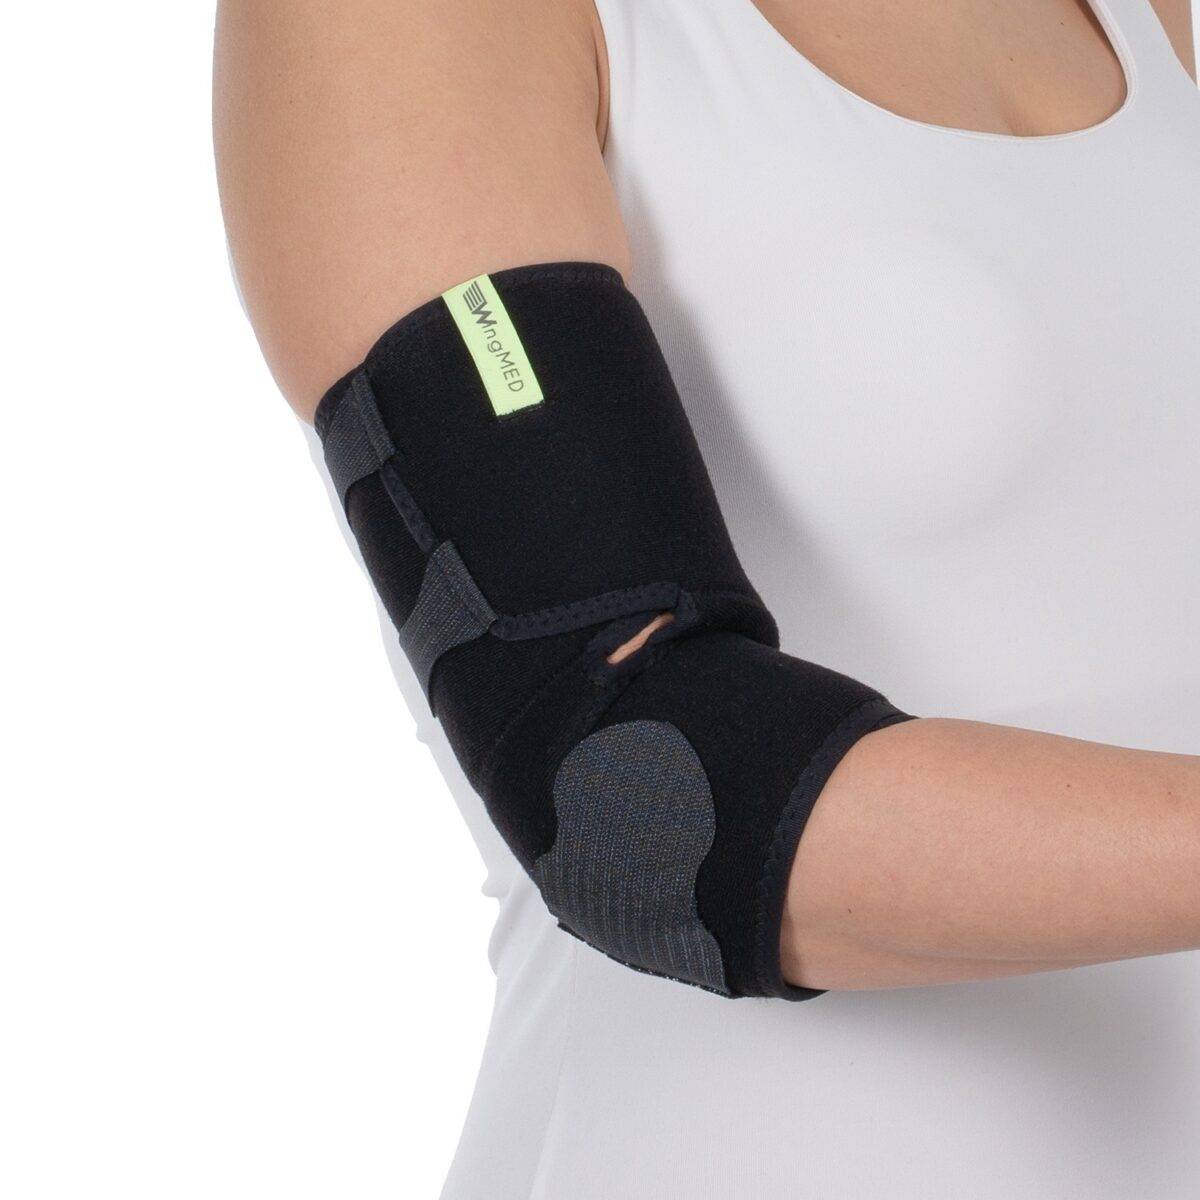 wingmed orthopedic equipments W203 W205 tennis elbow support 6